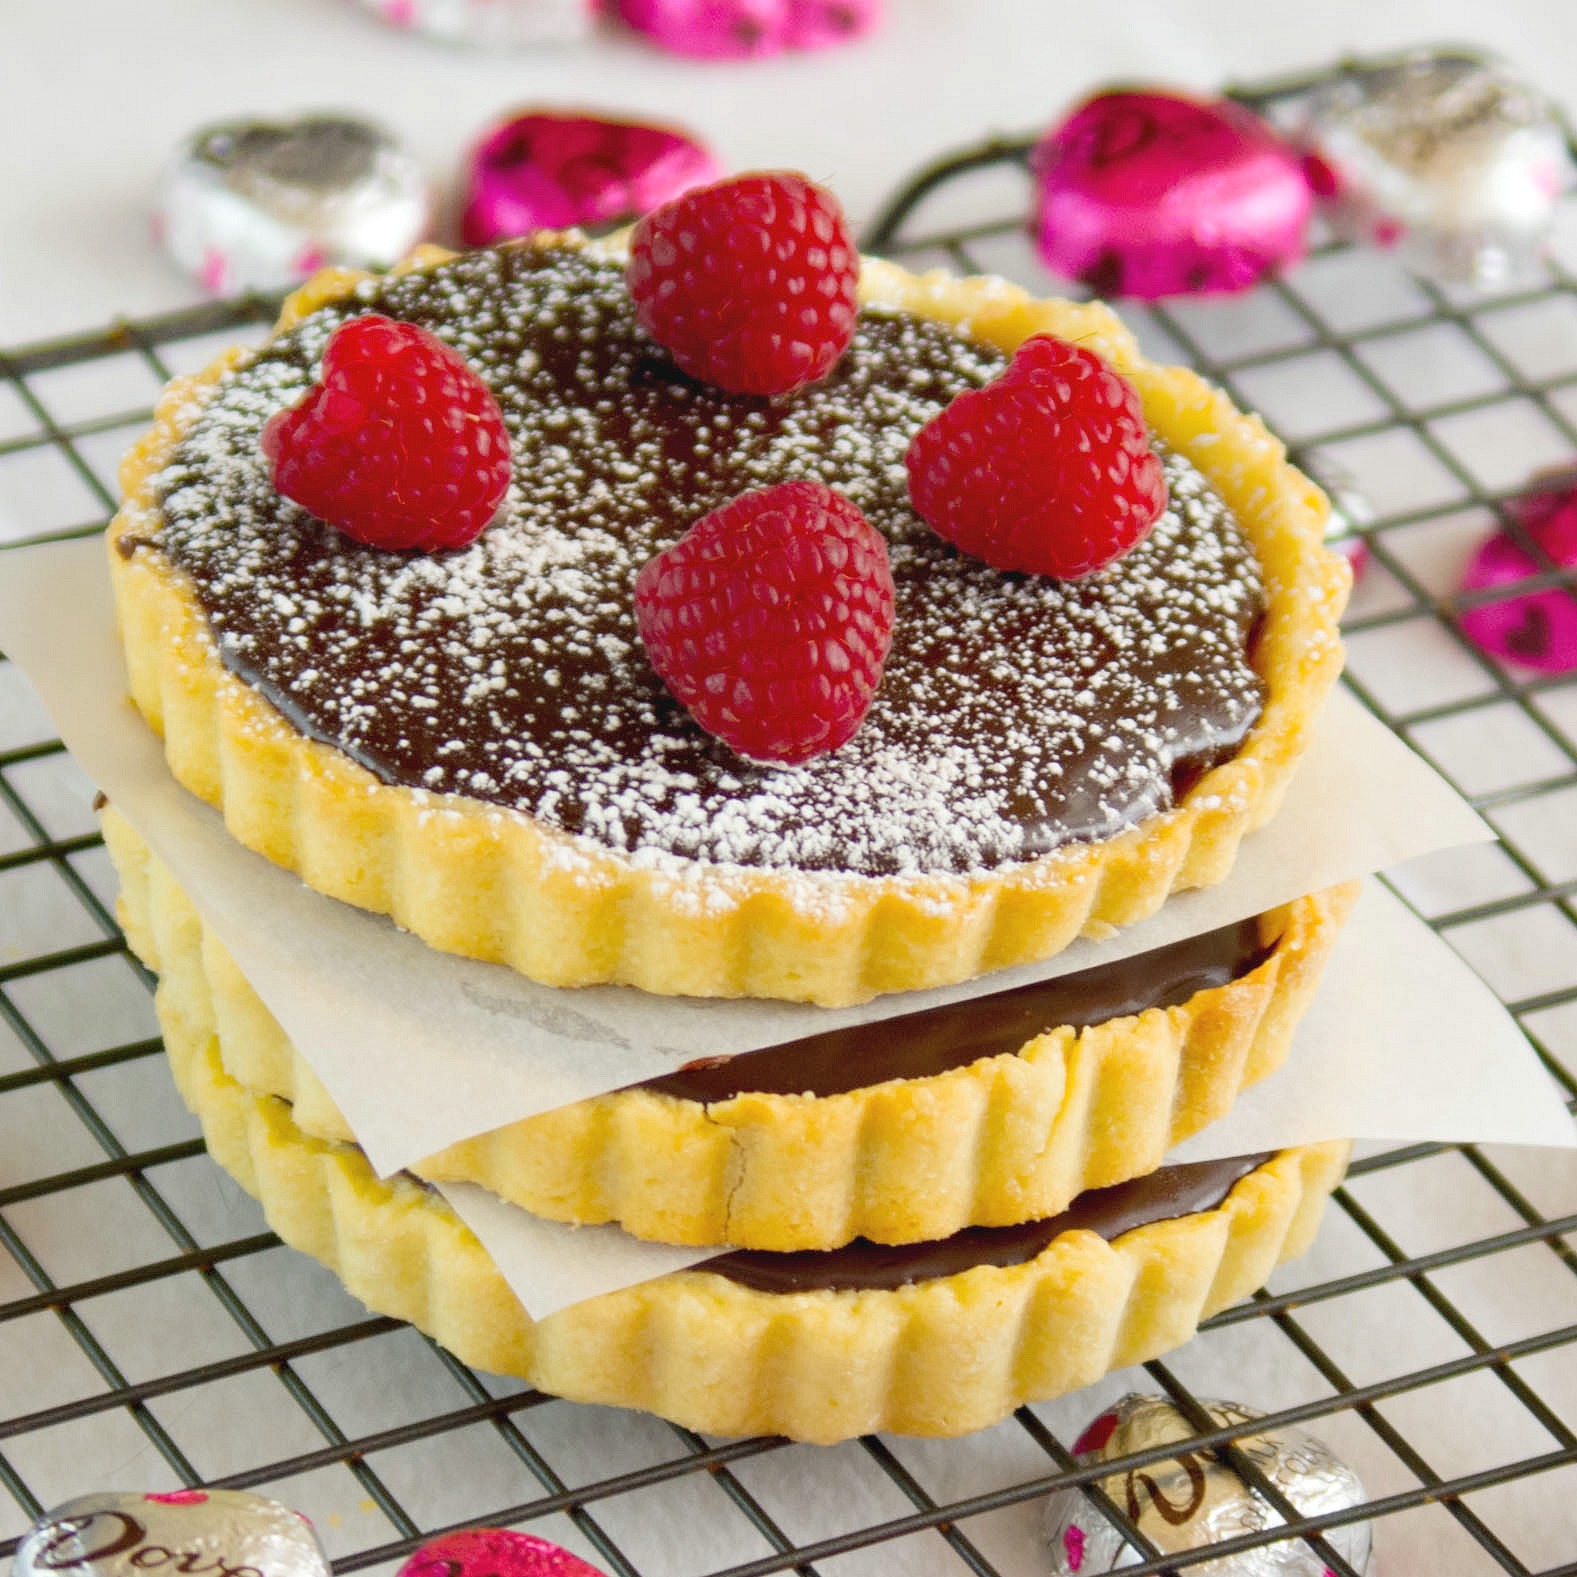 If you want to impress your significant other, make this Chocolate Raspberry Tart. The ultimate Valentine's Day dessert!| https://dadwhats4dinner.com